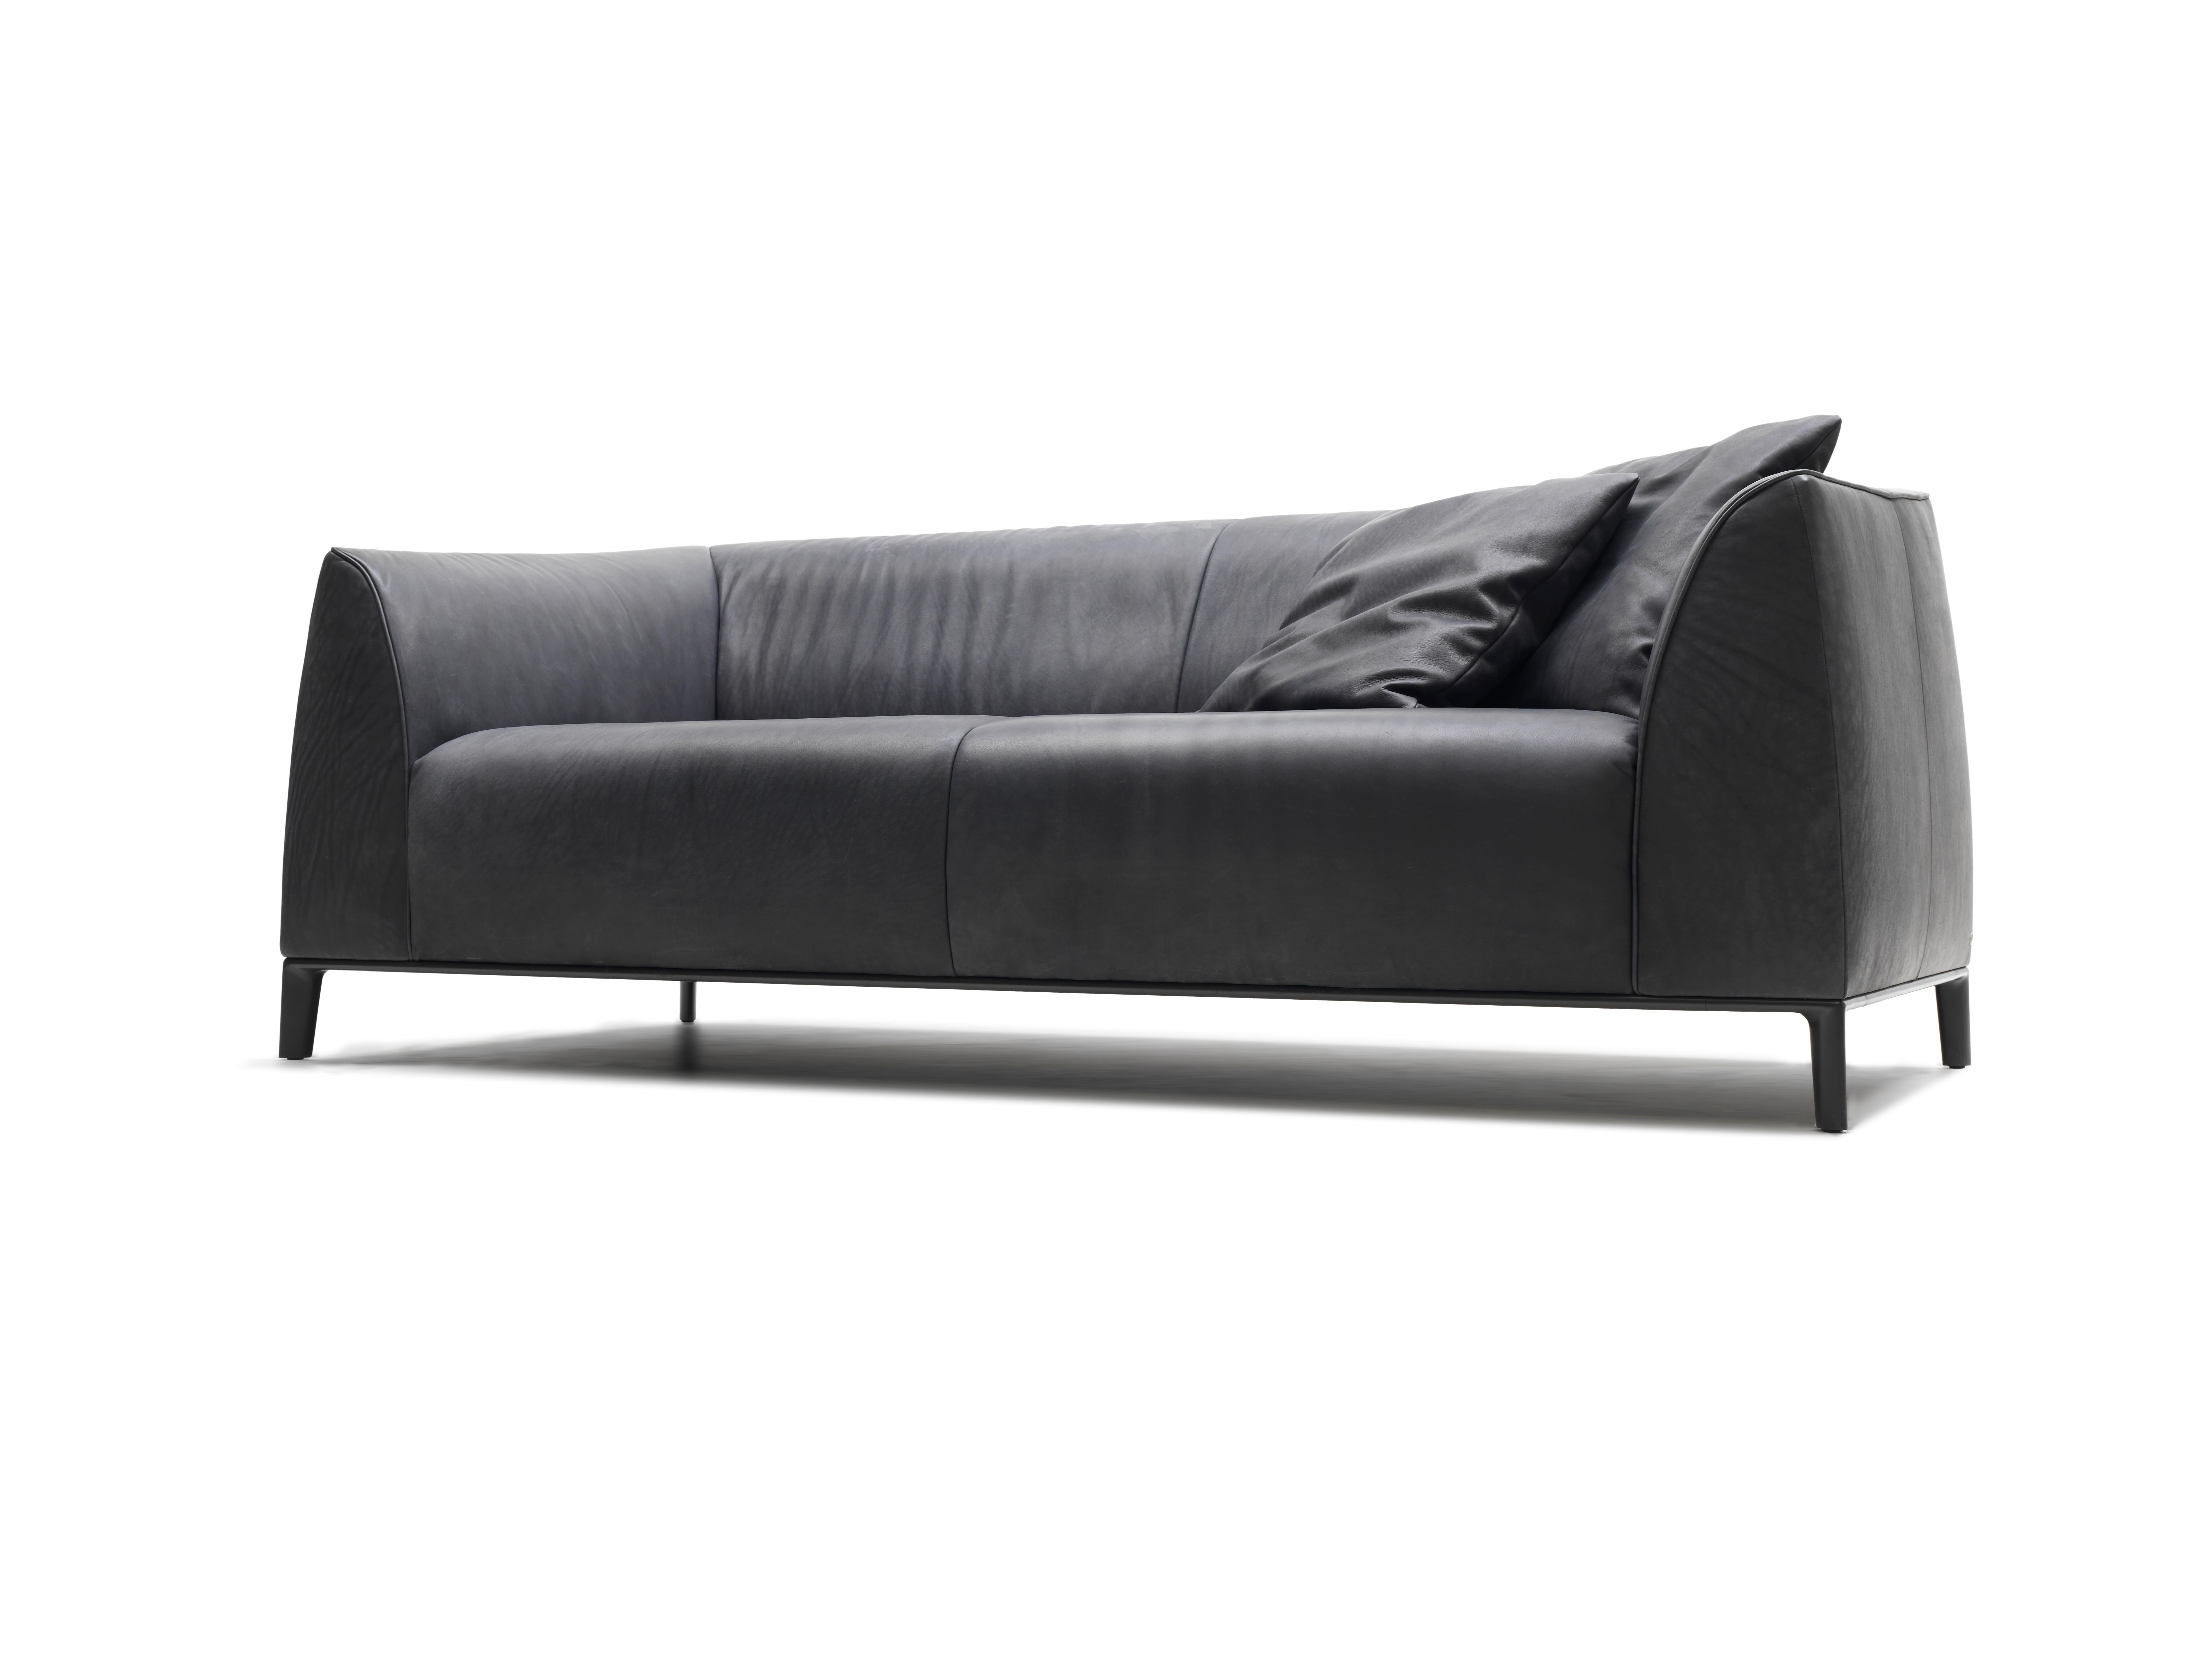 Modern Set of DS-276 Sofa and Cushions by De Sede